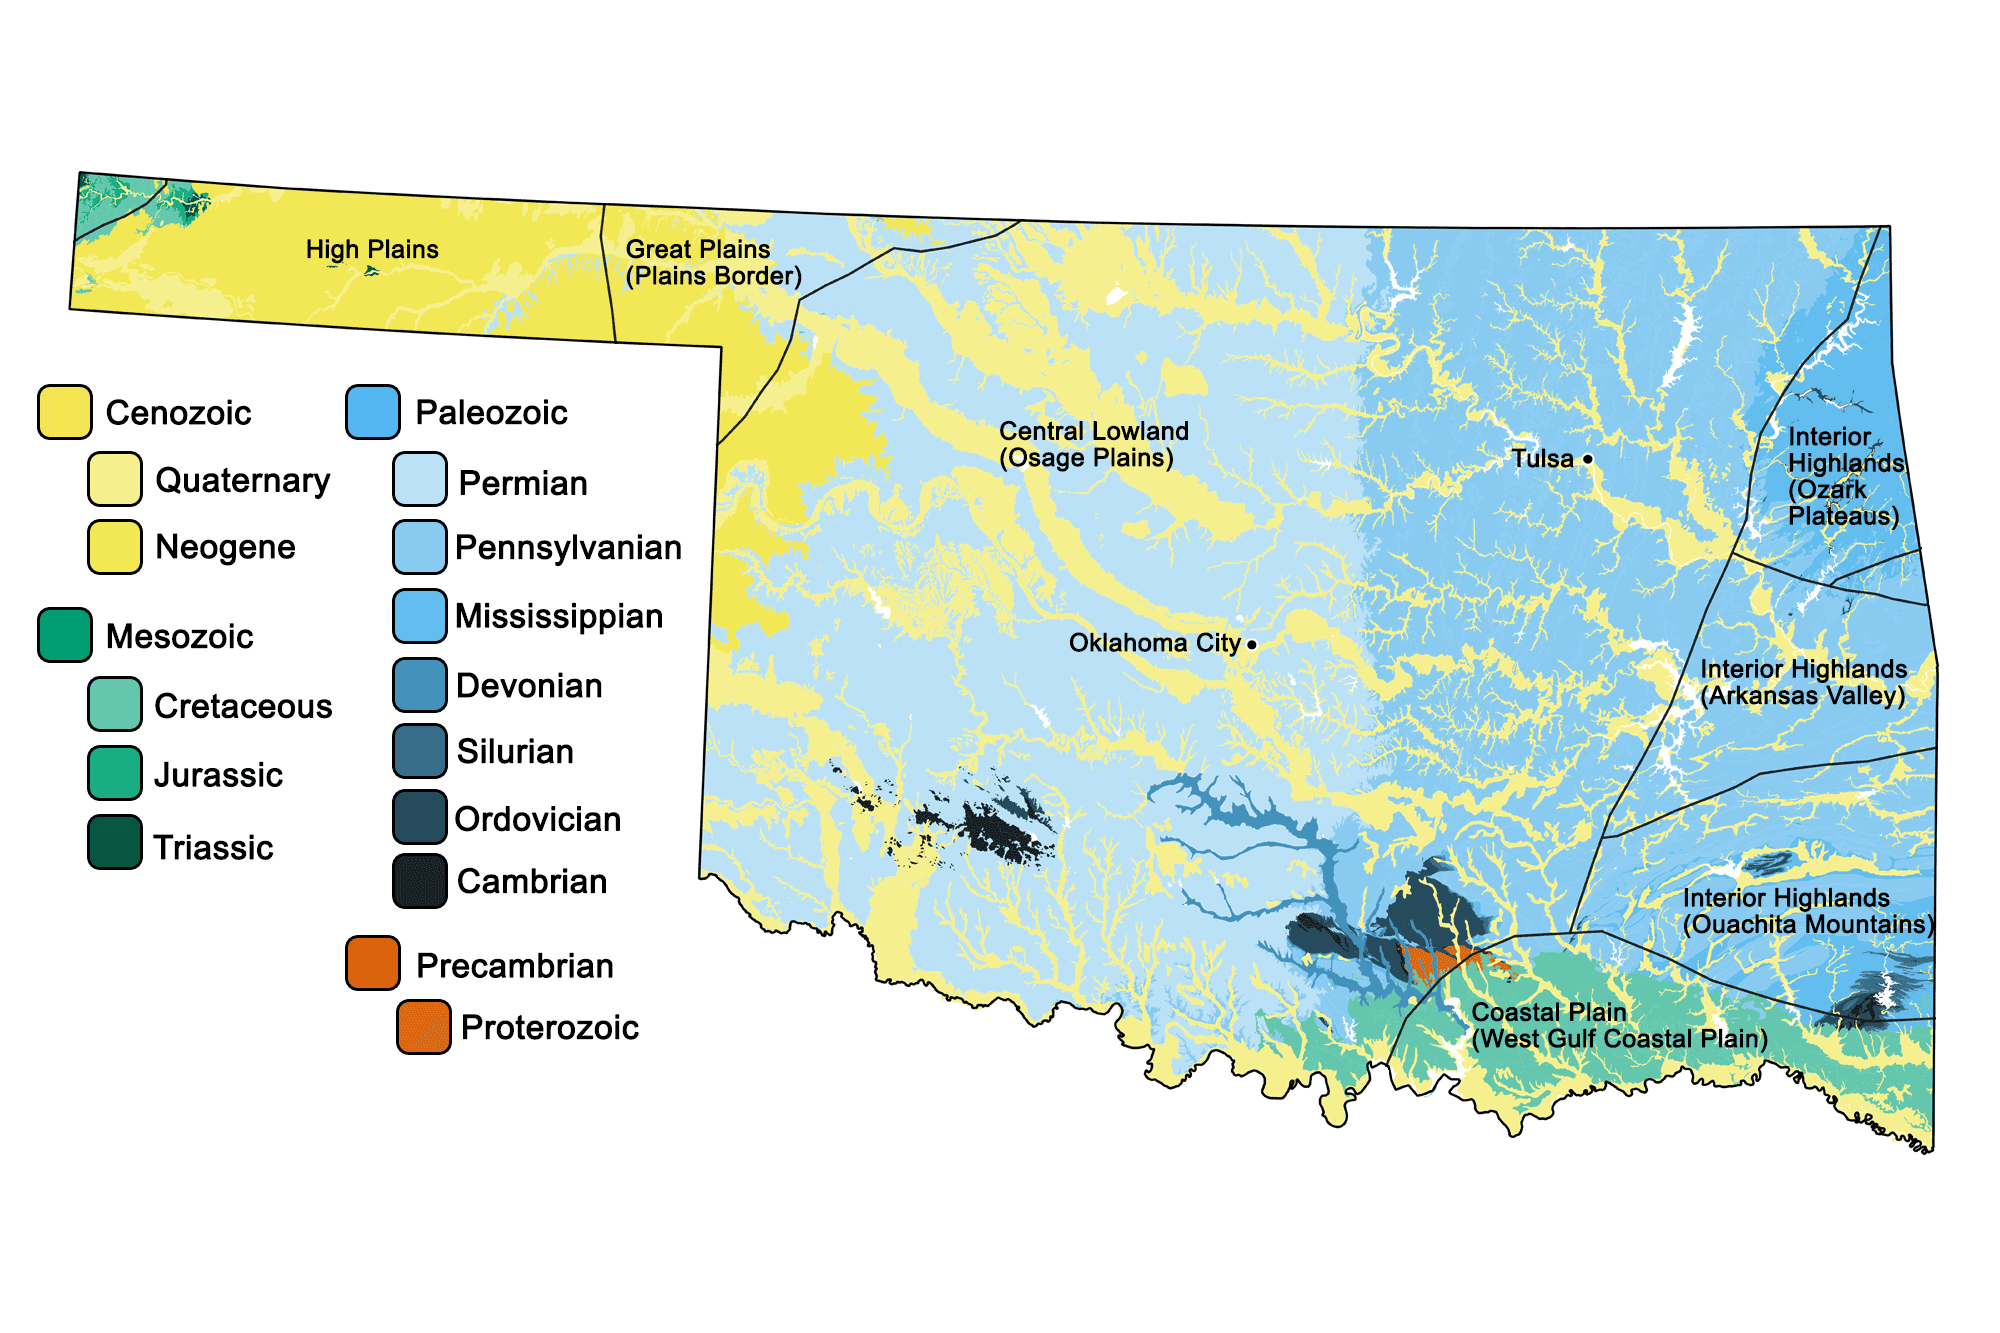 Geologic map of Oklahoma with physiographic regions identified.